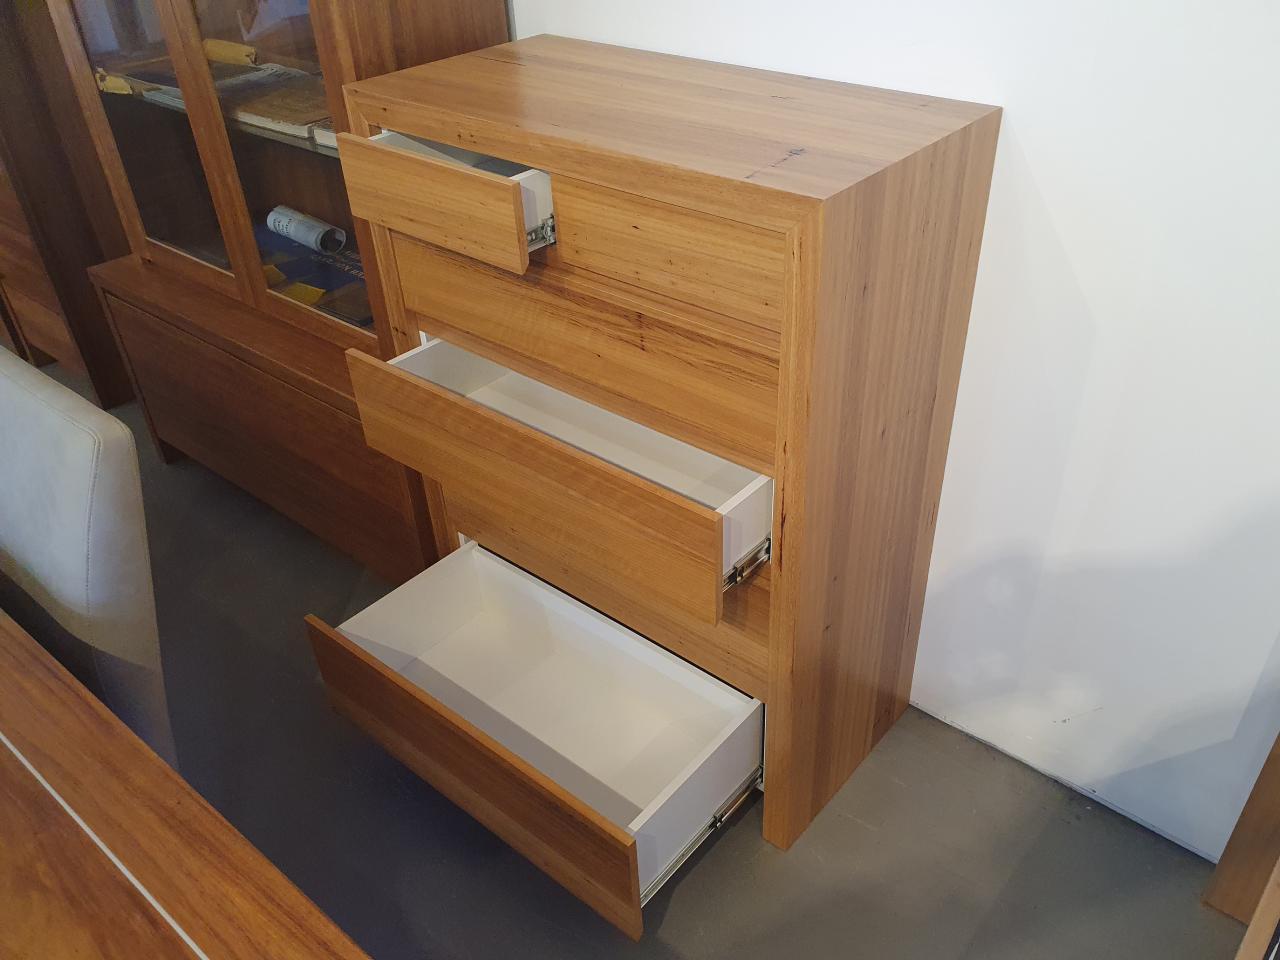 KT Chest of Drawers 6 Blackbutt Timber Quality Furniture Made in Adelaide, South Australia